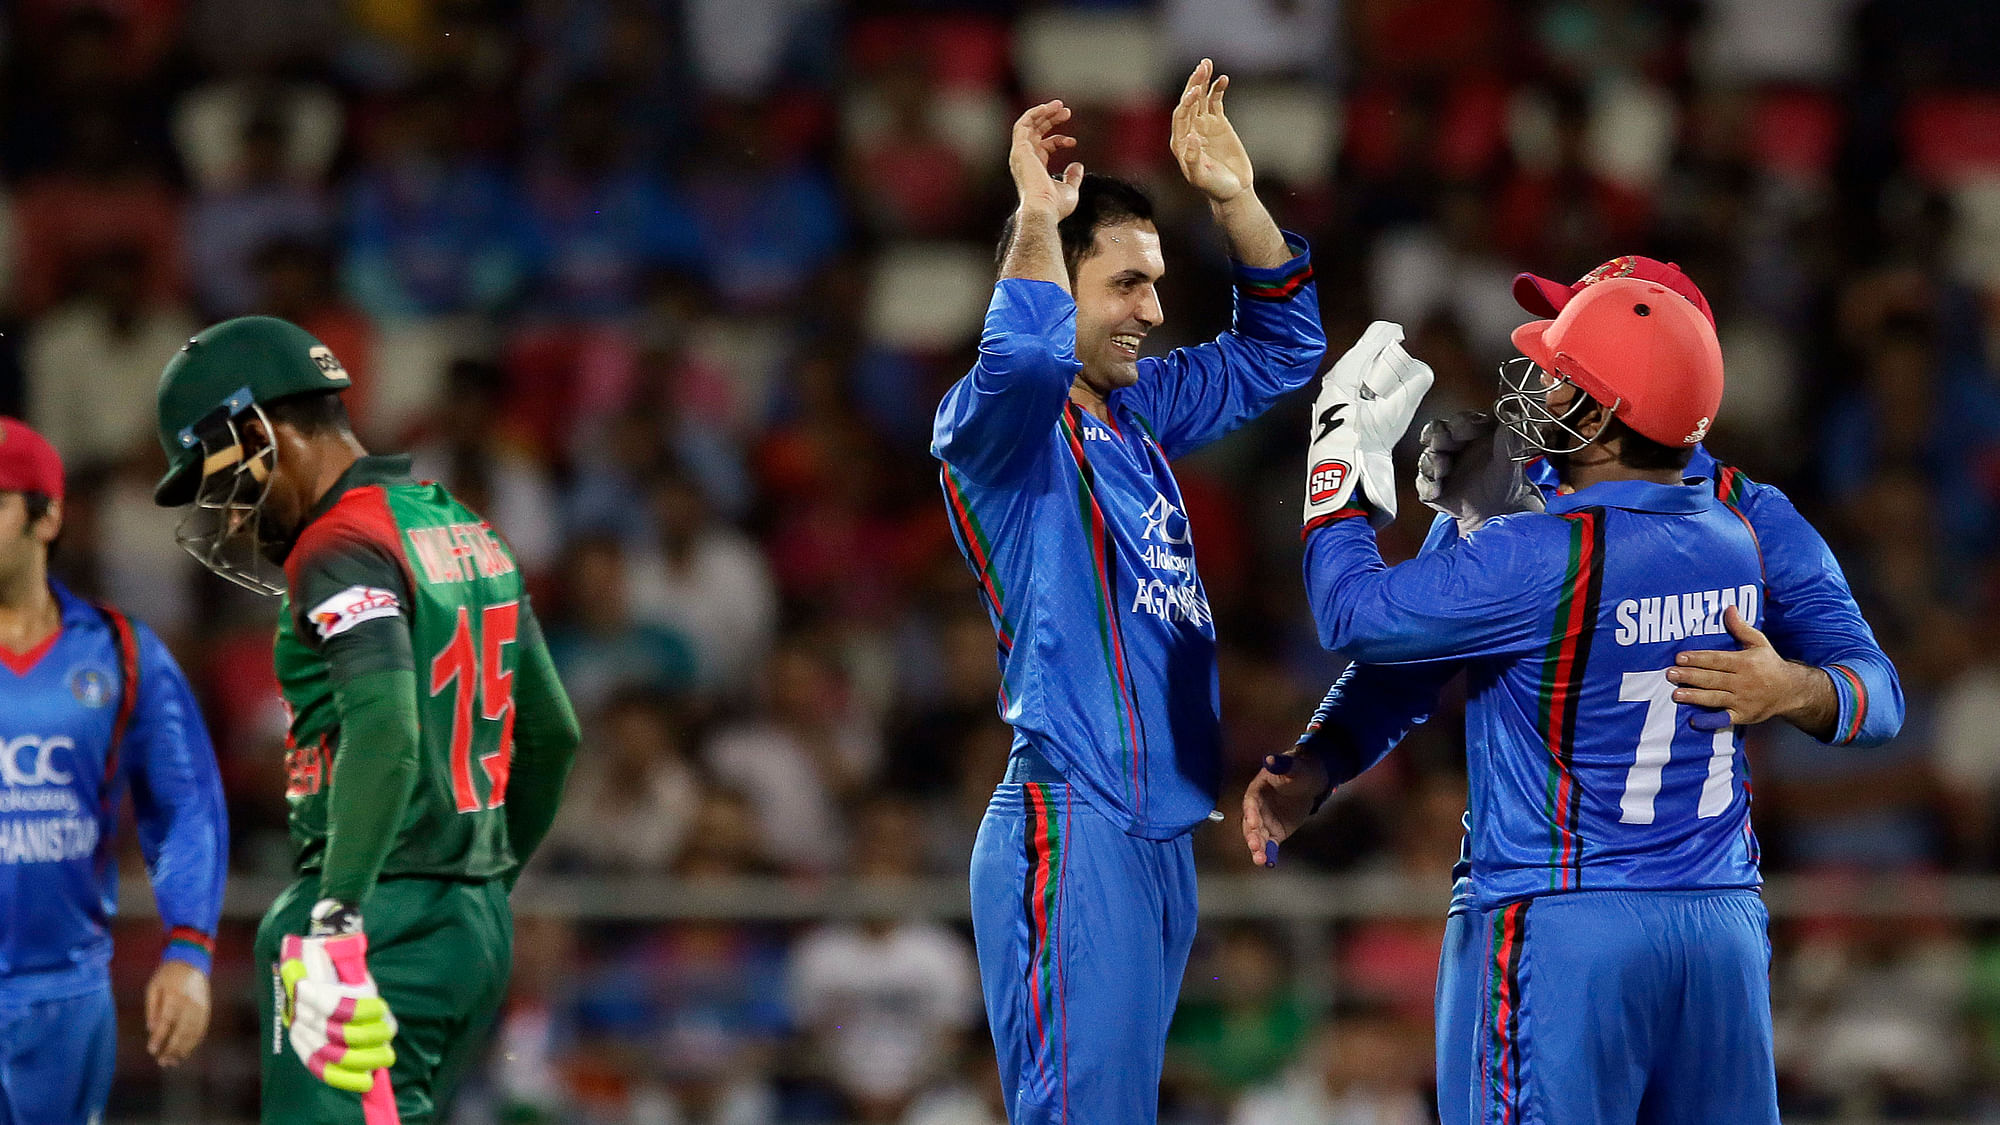 Afghanistan cricket players celebrate the wicket of Mushfiqur Rahim of Afghanistan during the second T20 cricket match between Afghanistan and Bangladesh in Dehraduni.